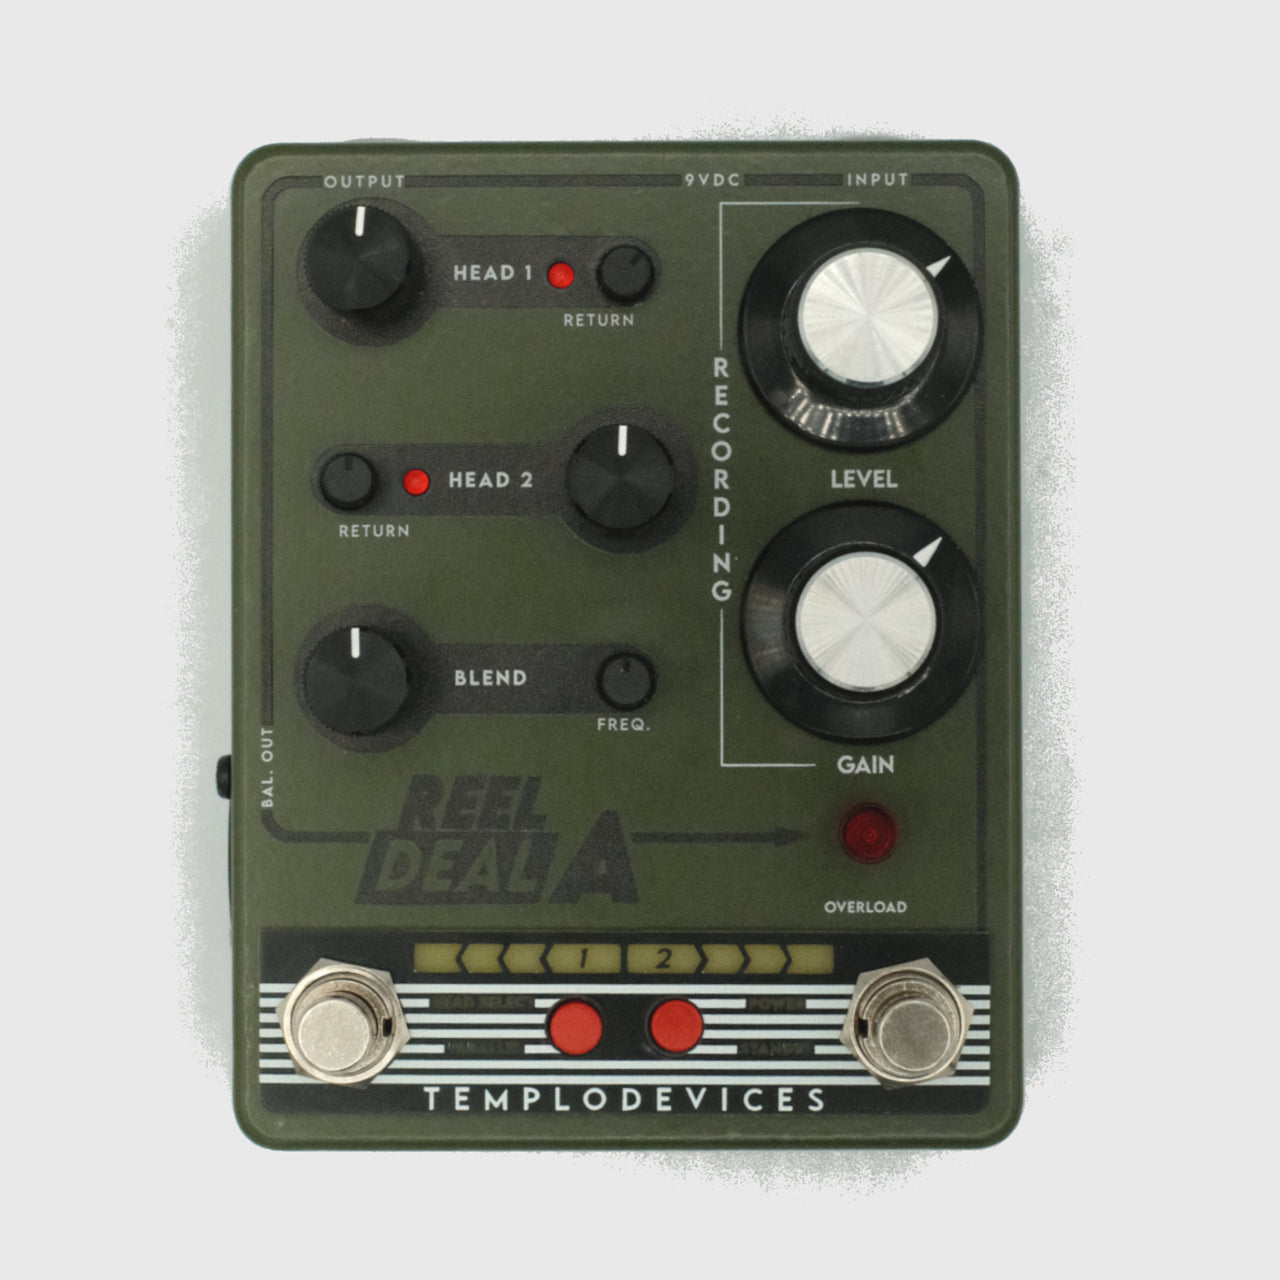 Reel Deal A Preamp and Dual Delay